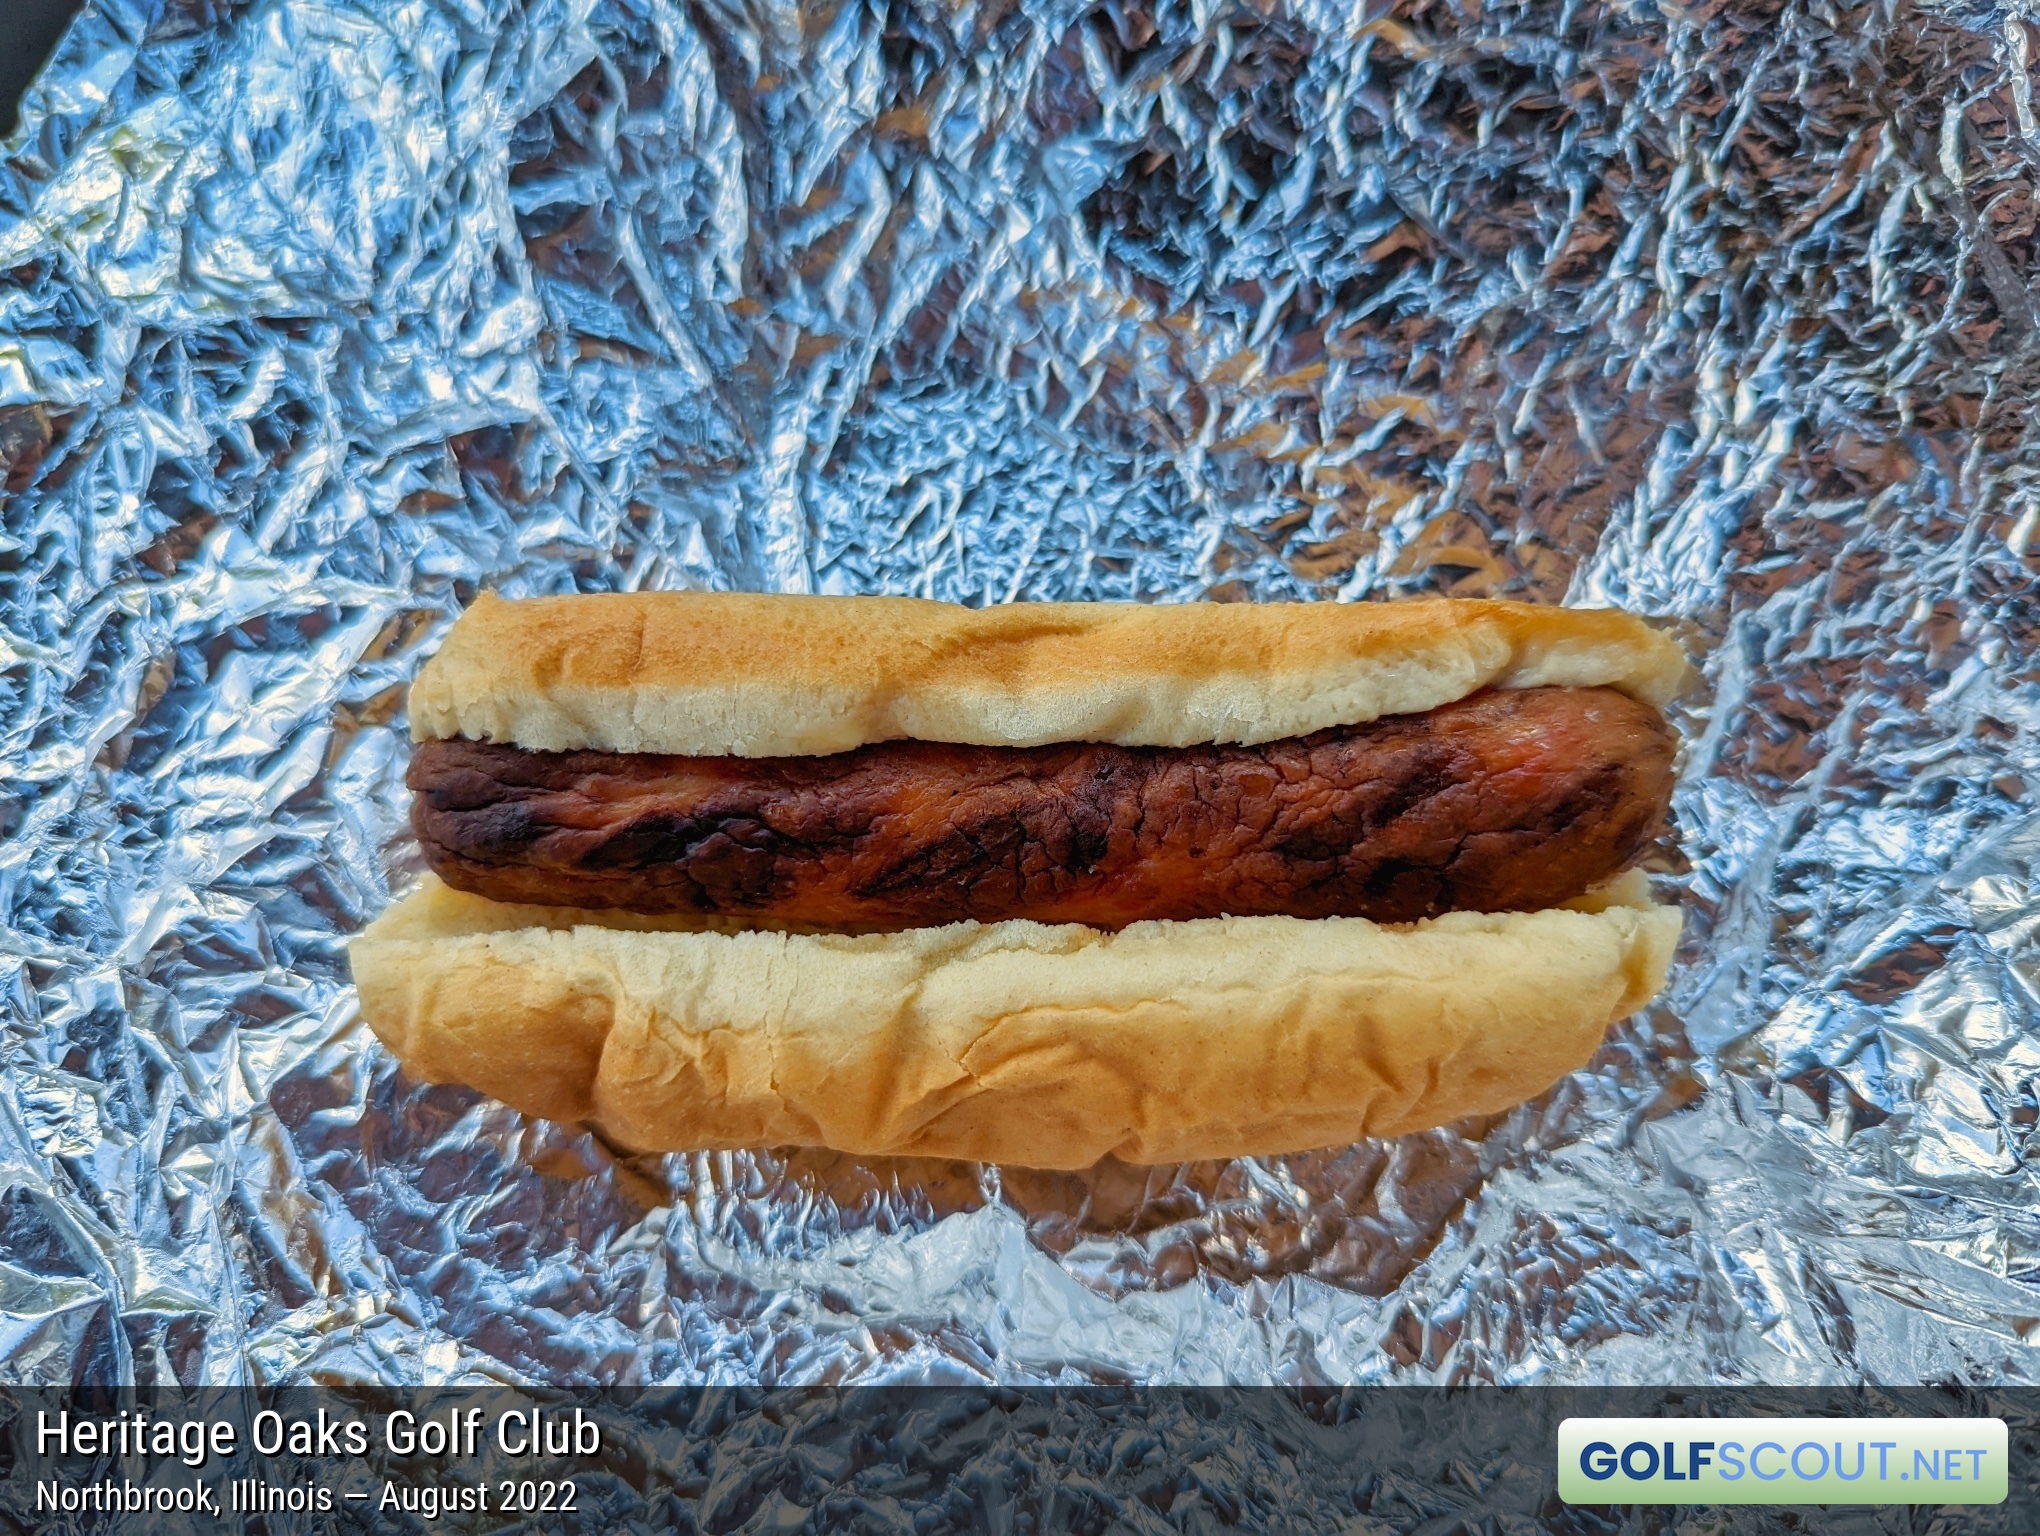 Photo of the food and dining at Heritage Oaks Golf Club in Northbrook, Illinois. Photo of the hot dog at Heritage Oaks Golf Club in Northbrook, Illinois.